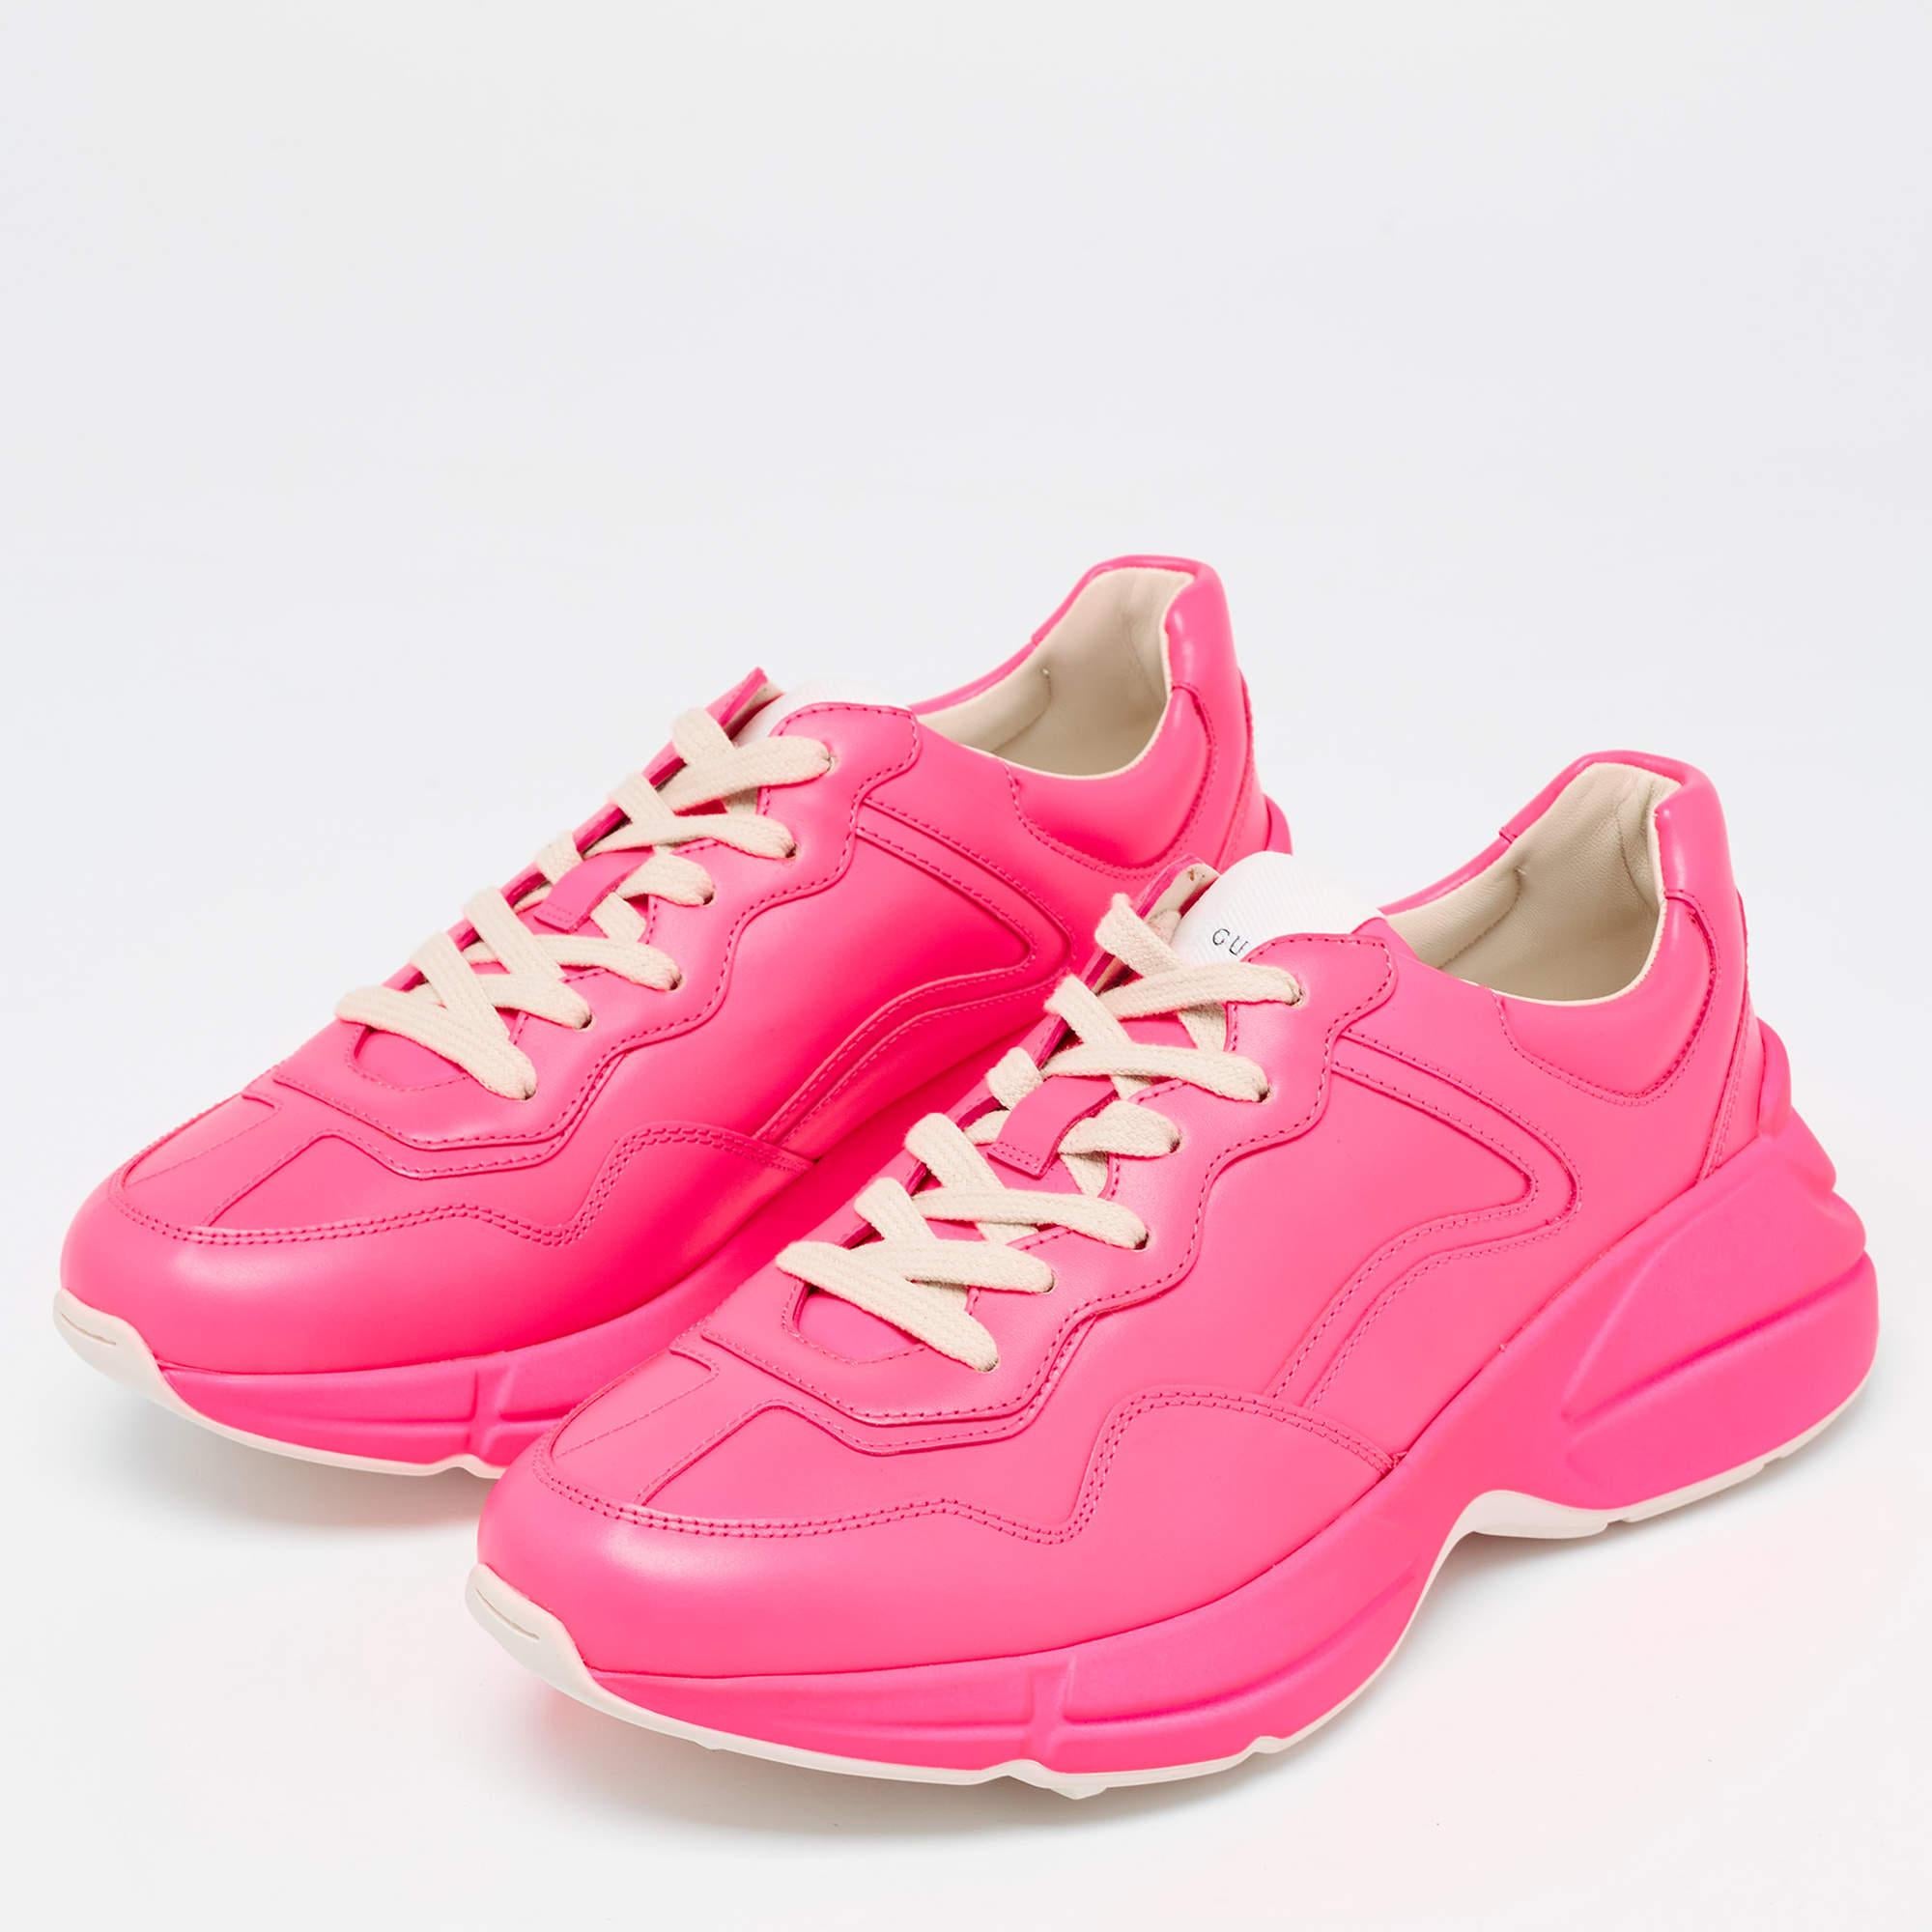 Gucci Neon Pink Leather Rhyton Sneakers Size 39 4